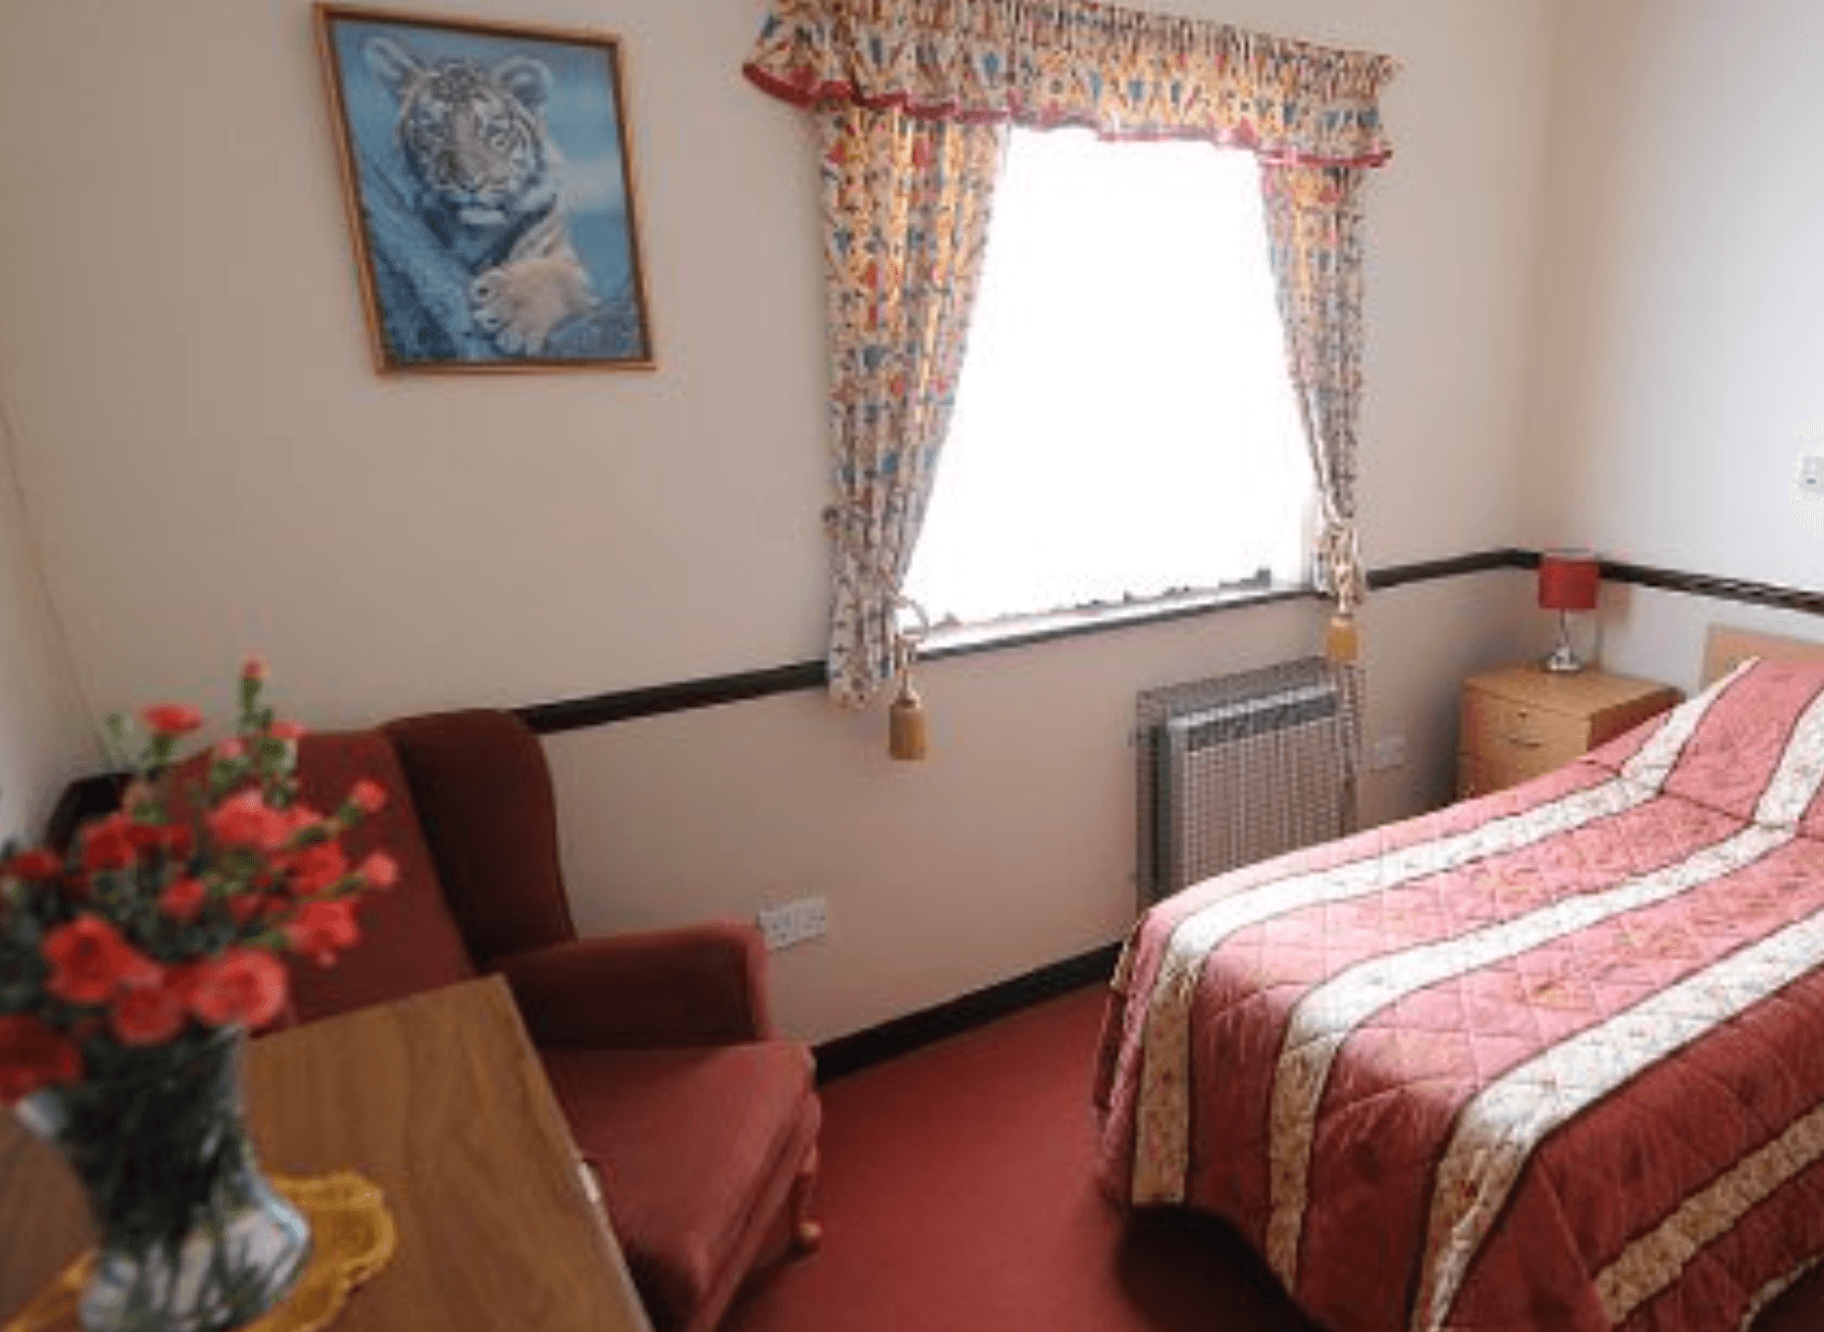 Bedroom of Milton House care home in Westcliff-on-Sea, Essex